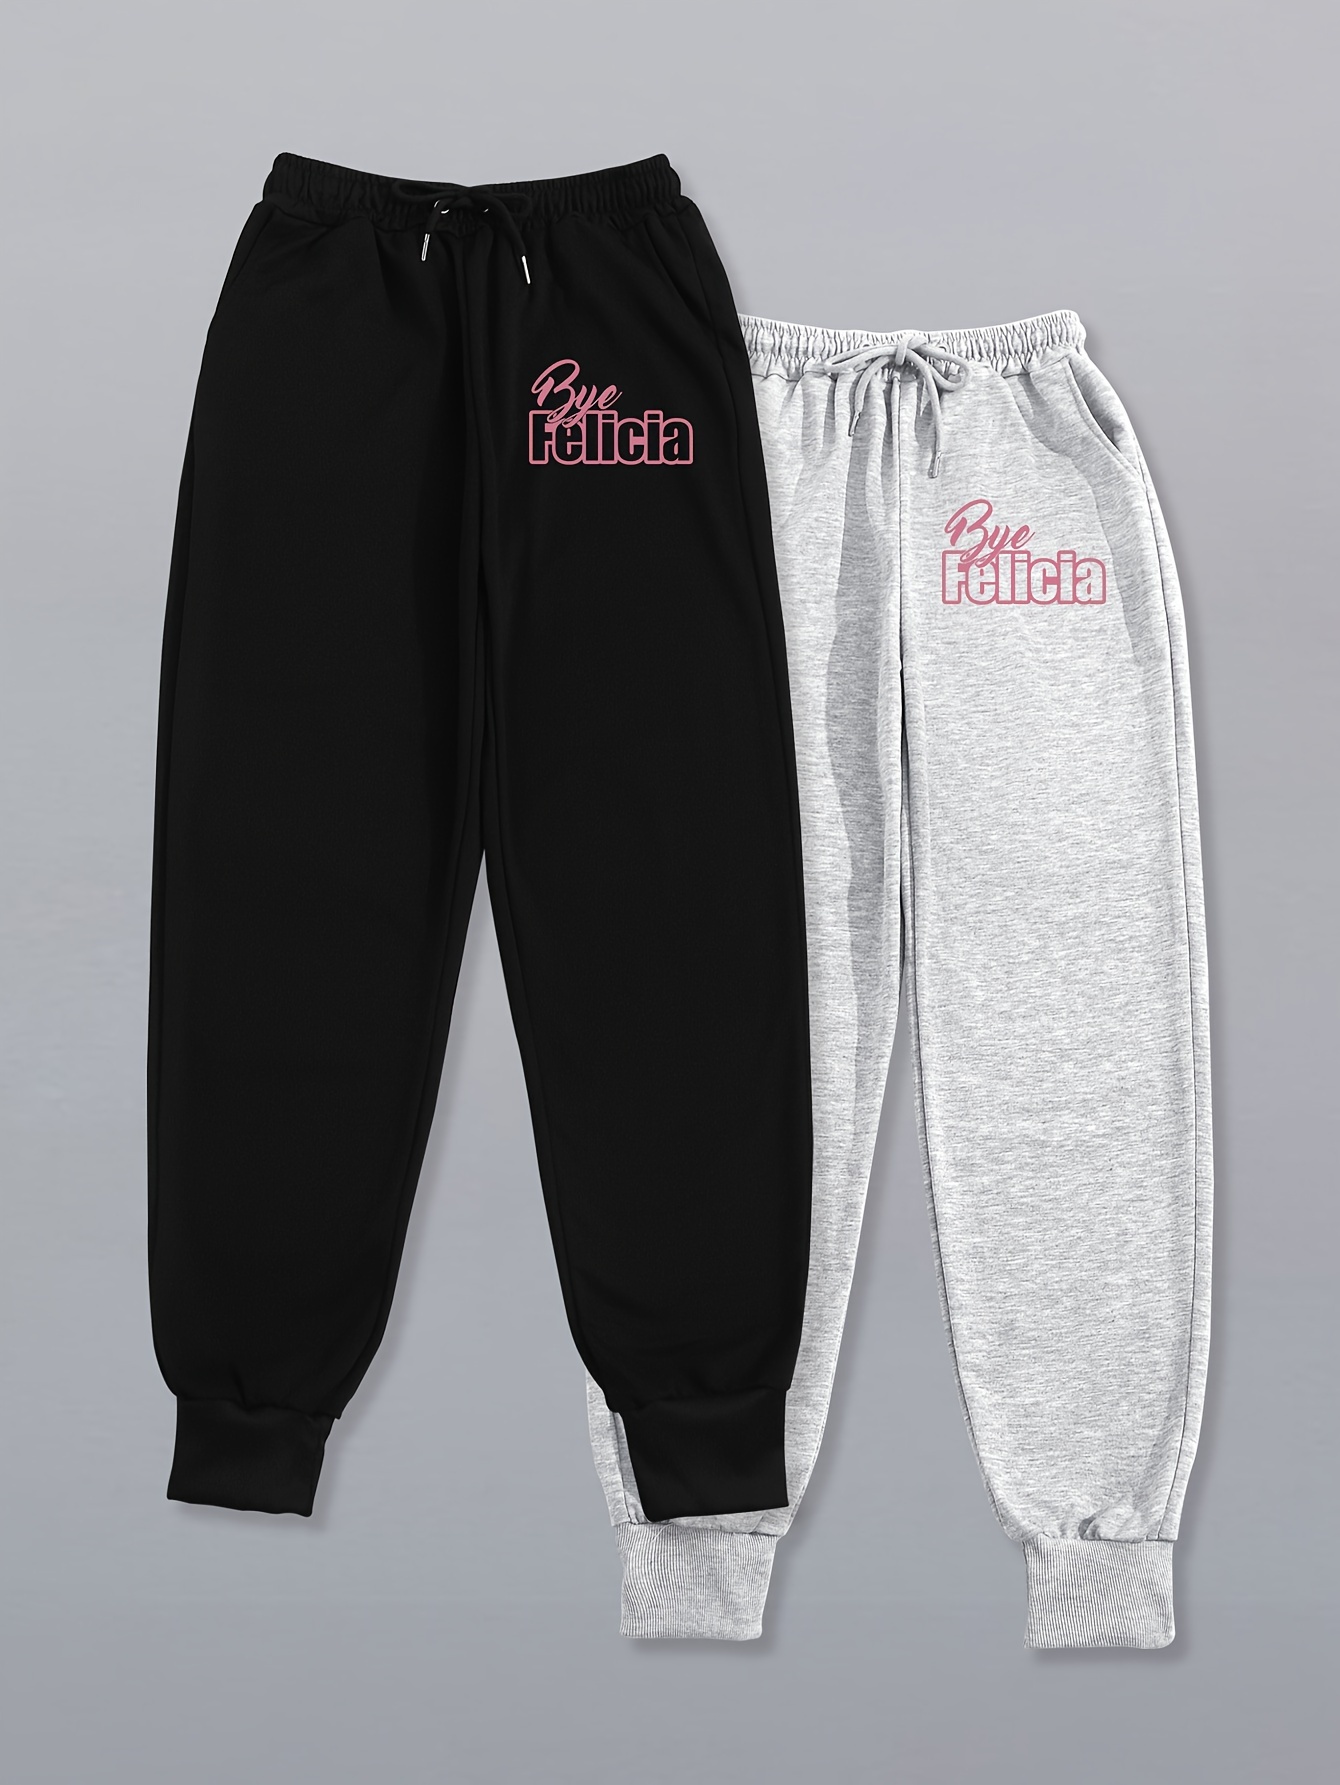 Sports Shorts With Pockets On Both Sides, Casual Sweatpants